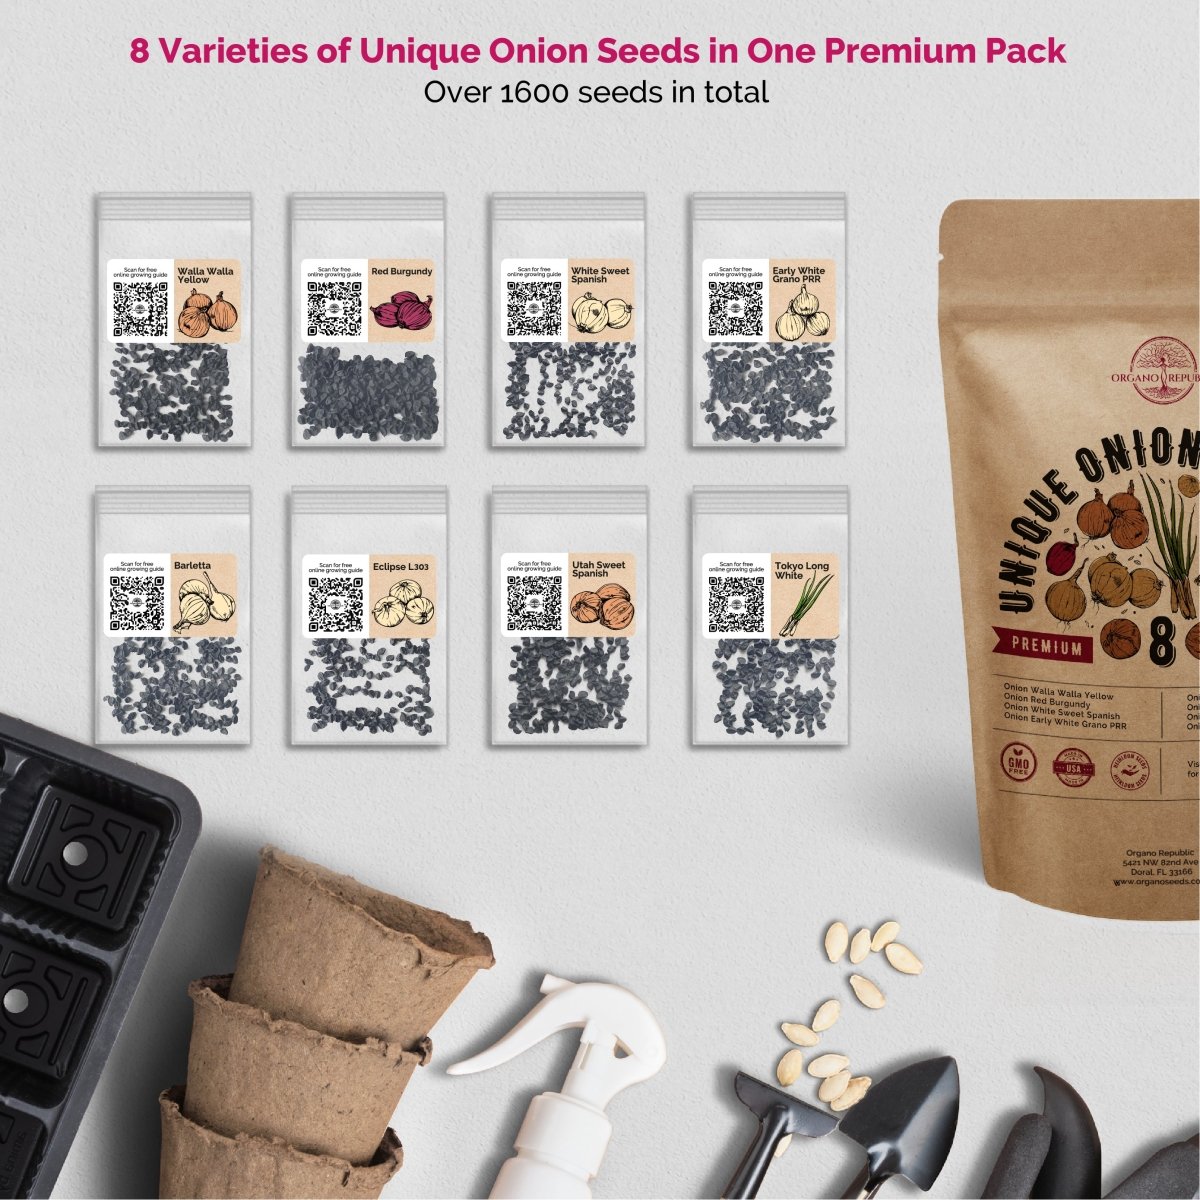 15 Lettuce & Salad Greens and 8 Onion Seeds Variety Packs Bundle Non-GMO Heirloom Seeds - Organo Republic